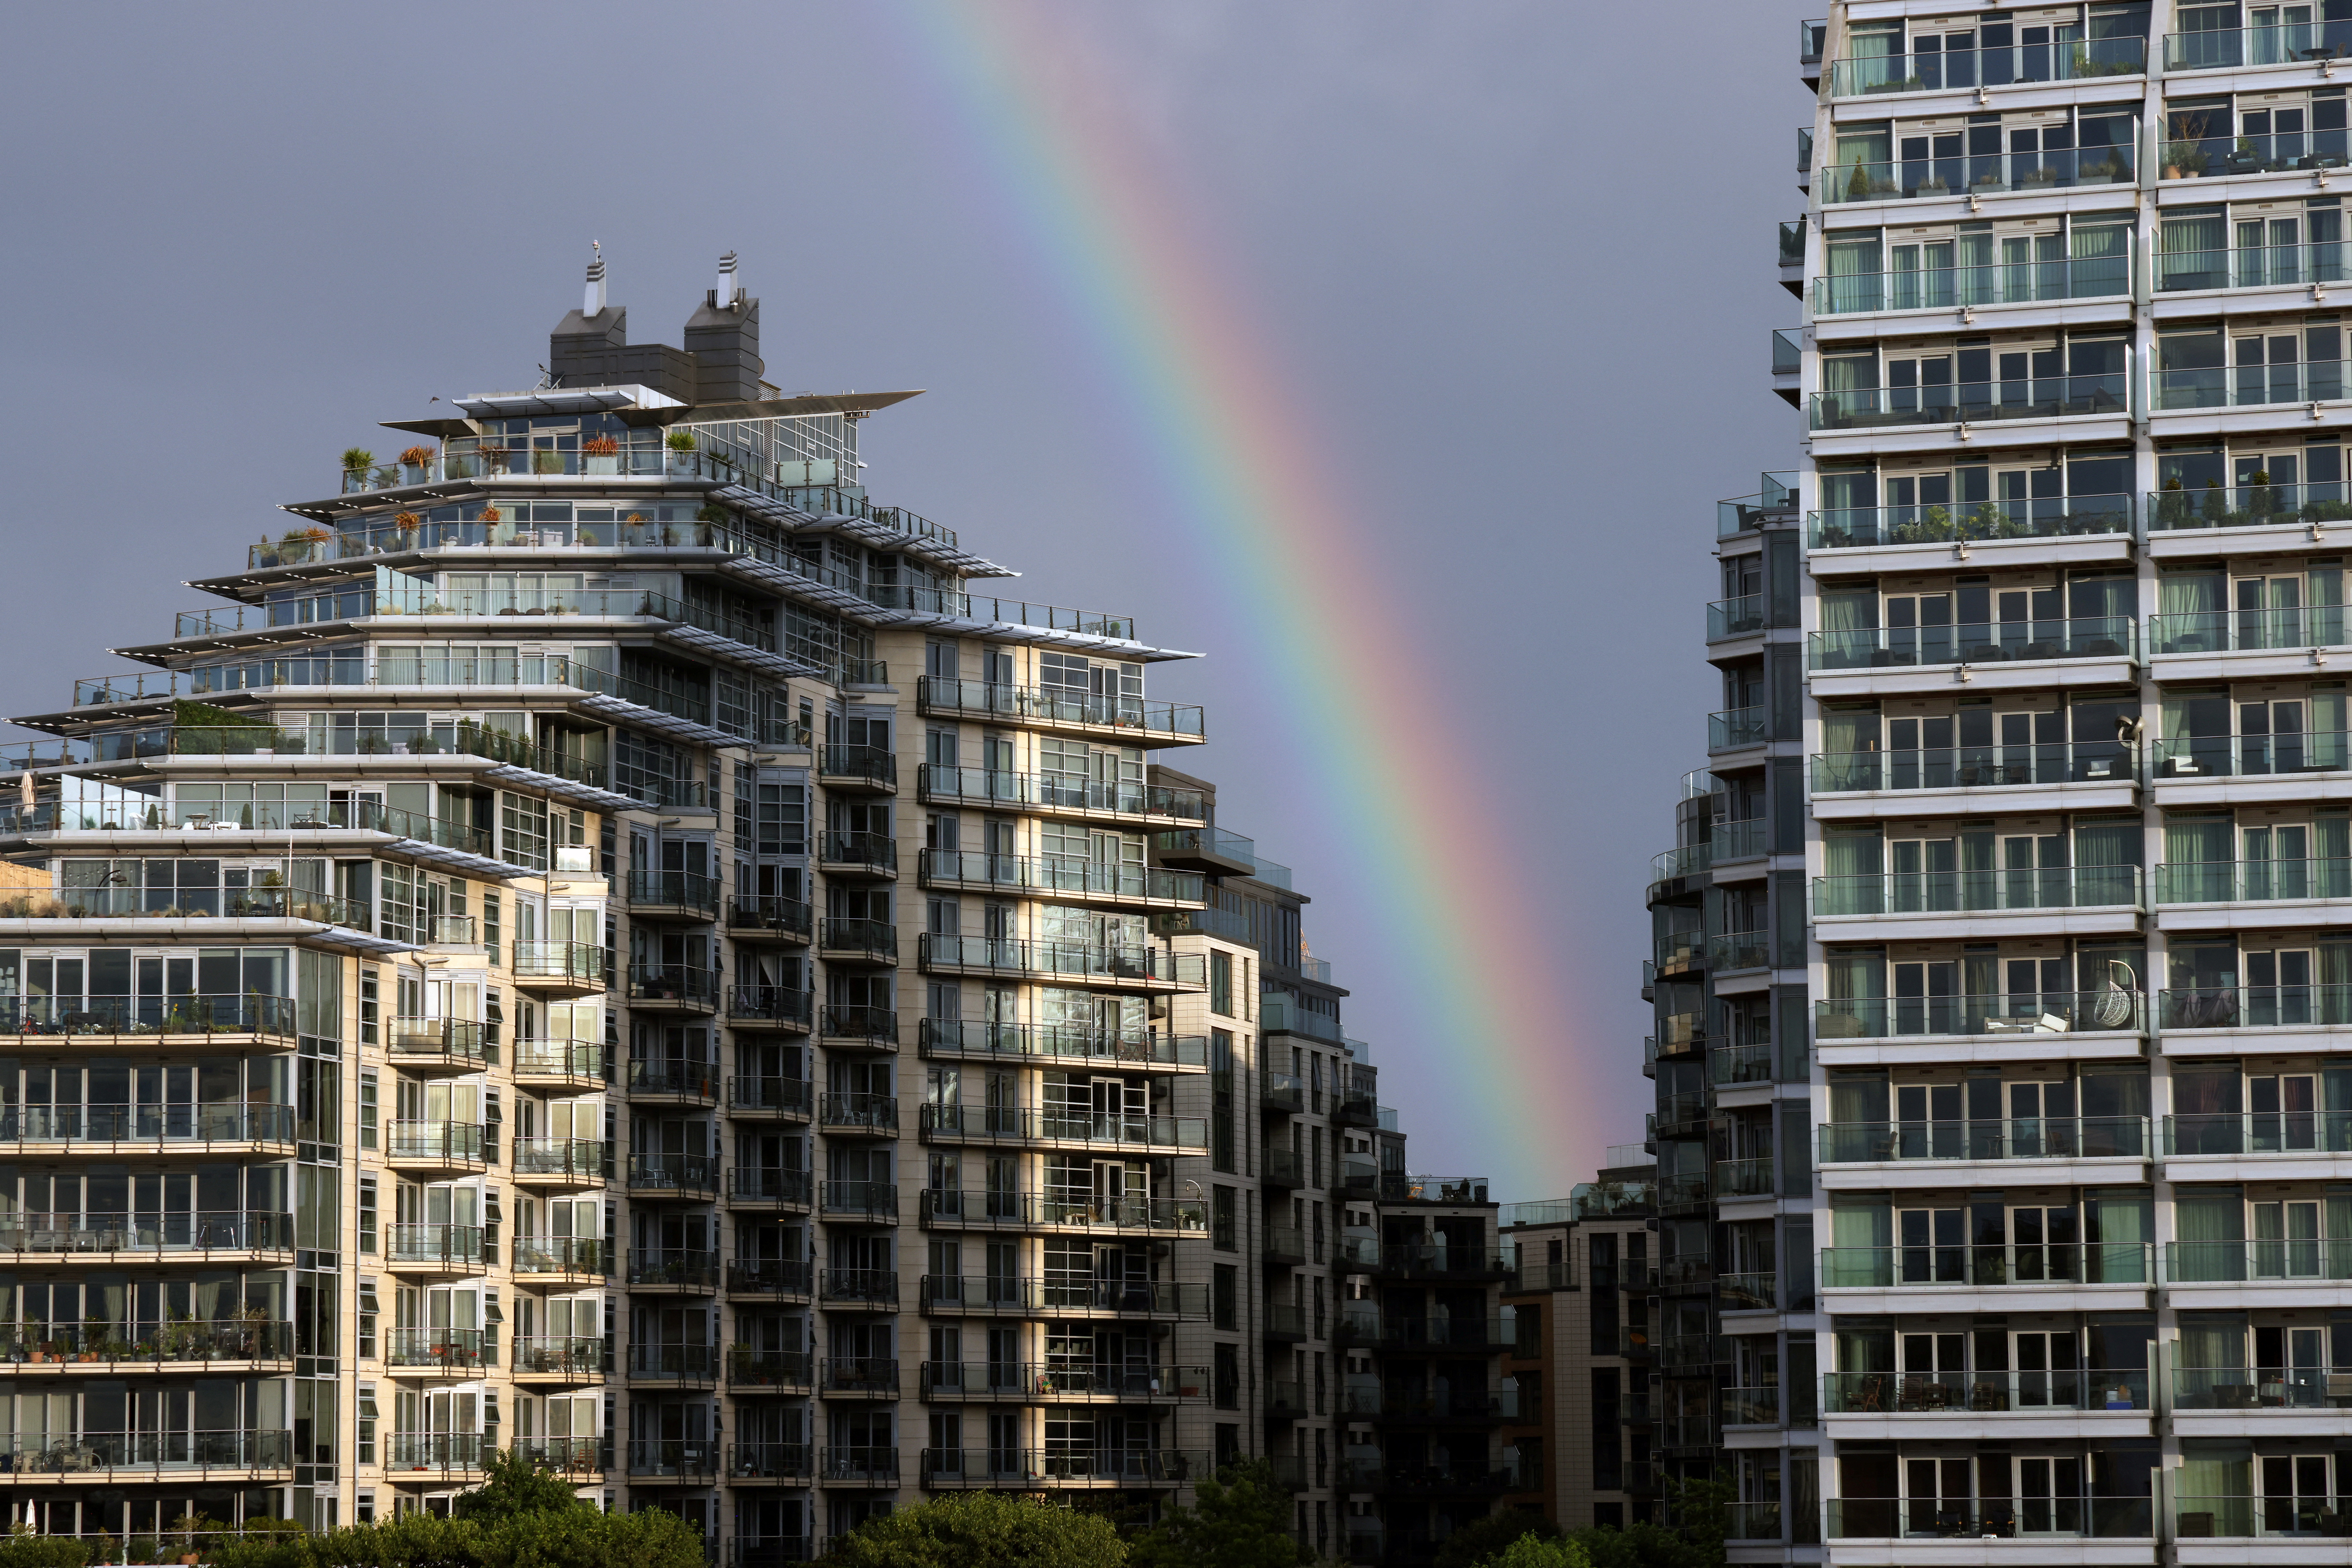 A rainbow is seen over apartments in Wandsworth on the River Thames